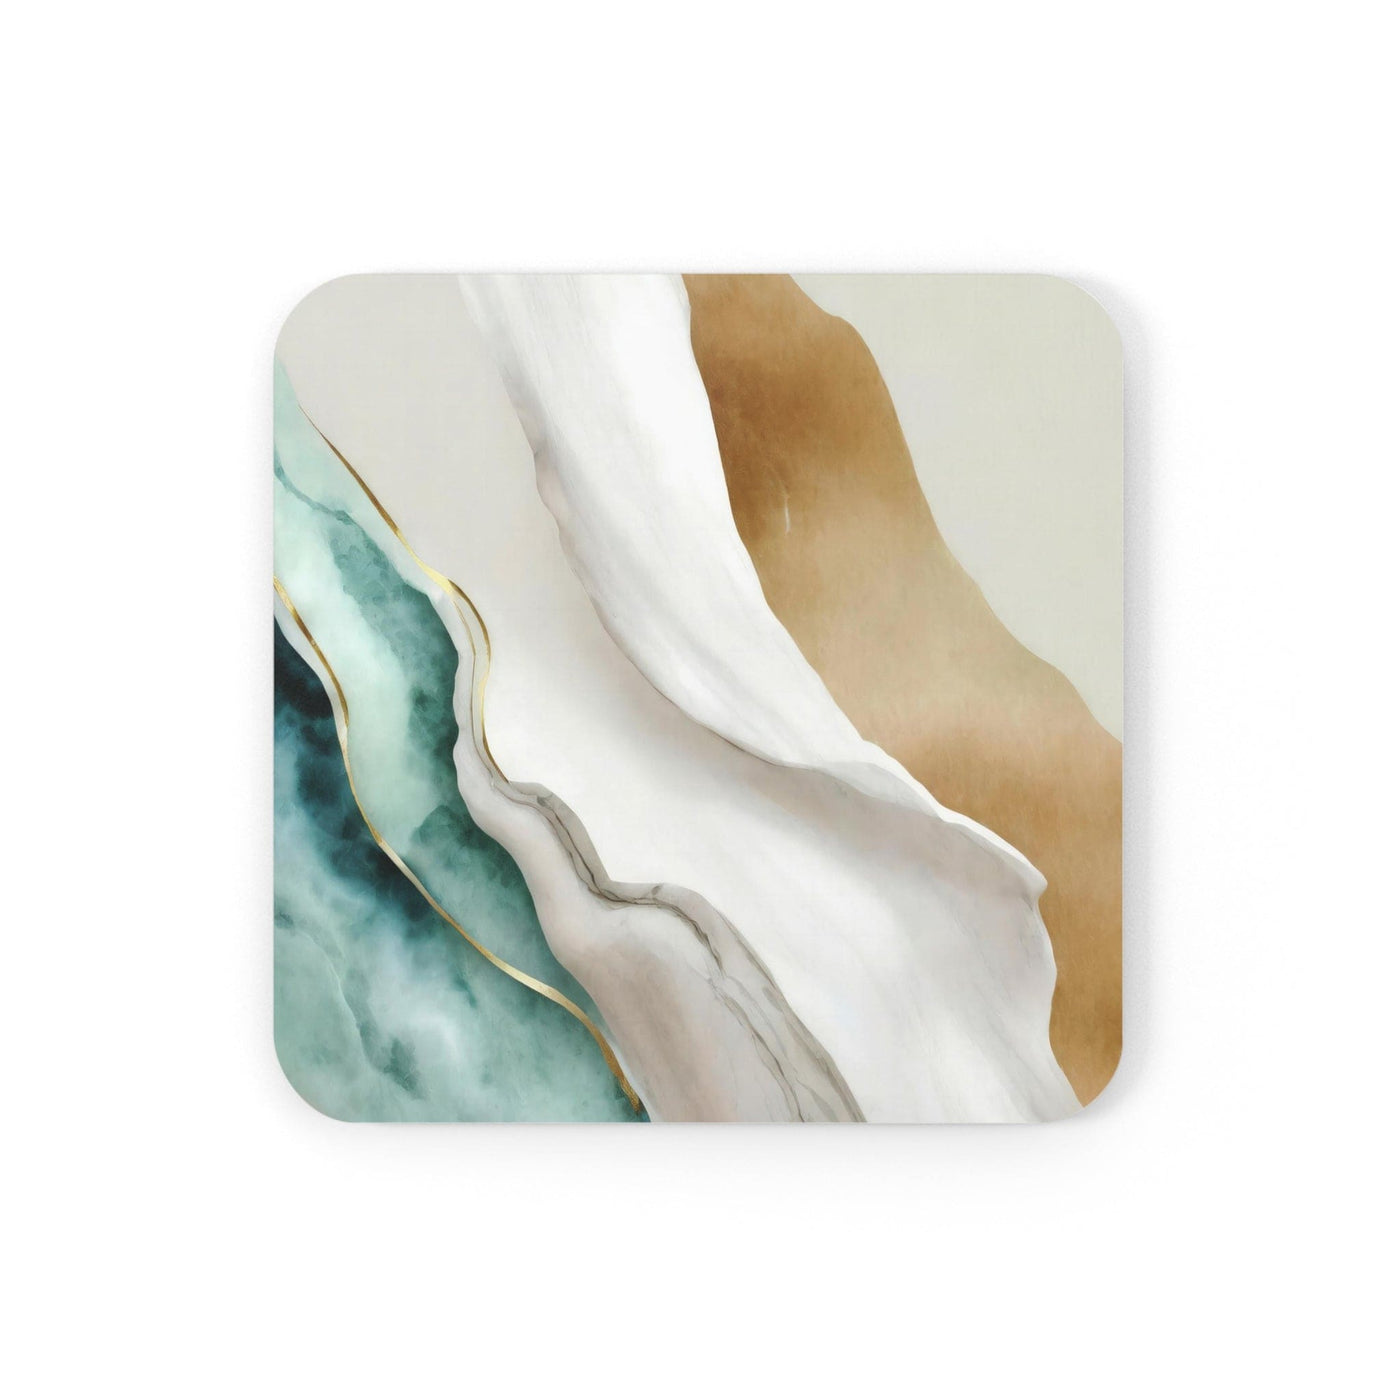 Coaster Set Of 4 For Drinks Cream White Green Marbled Print - Decorative